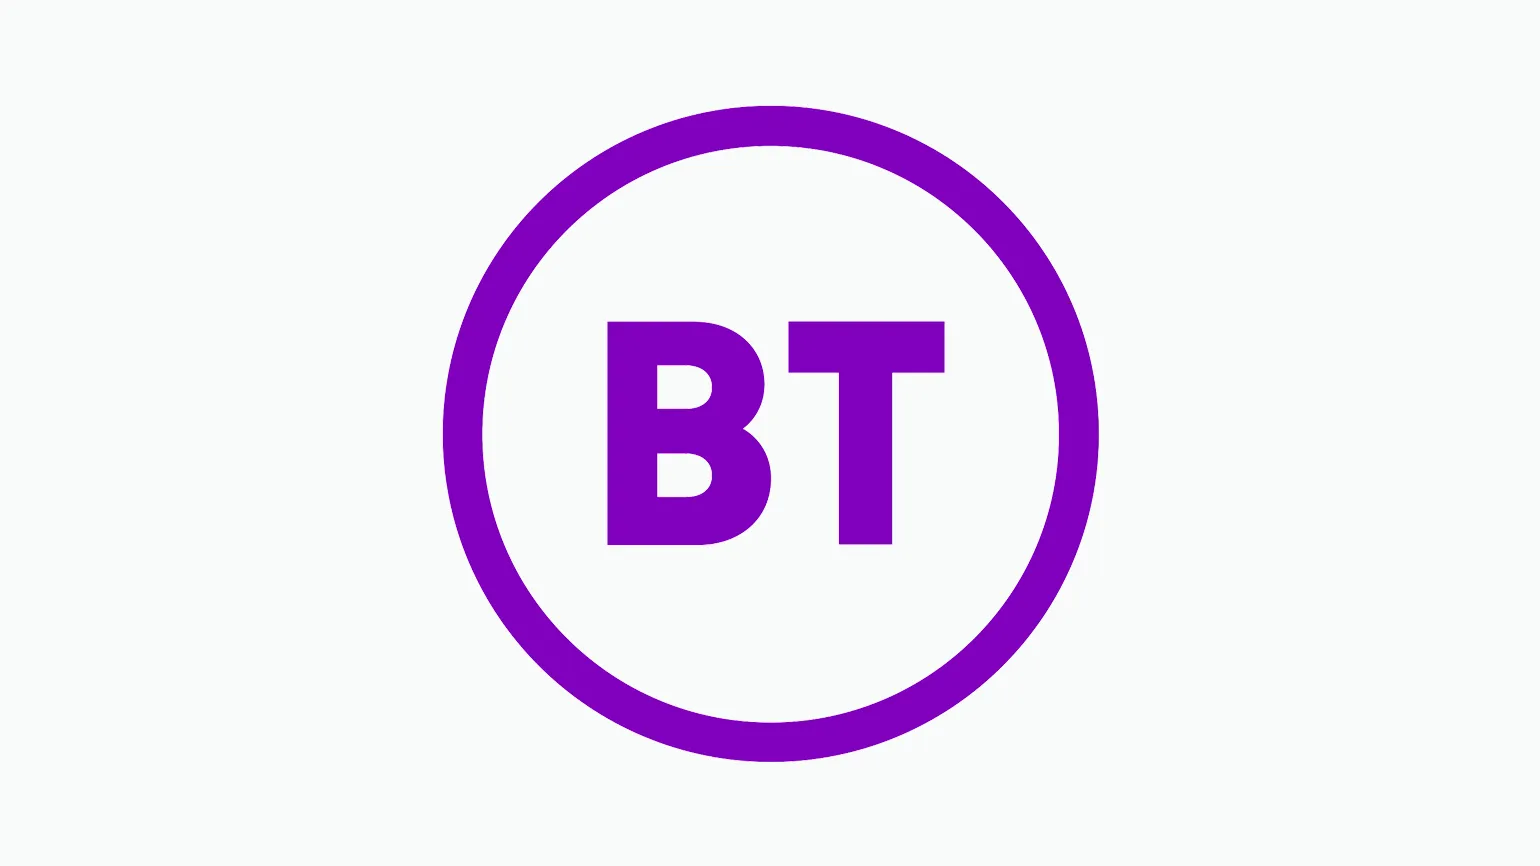 Upgrading your phone early with BT